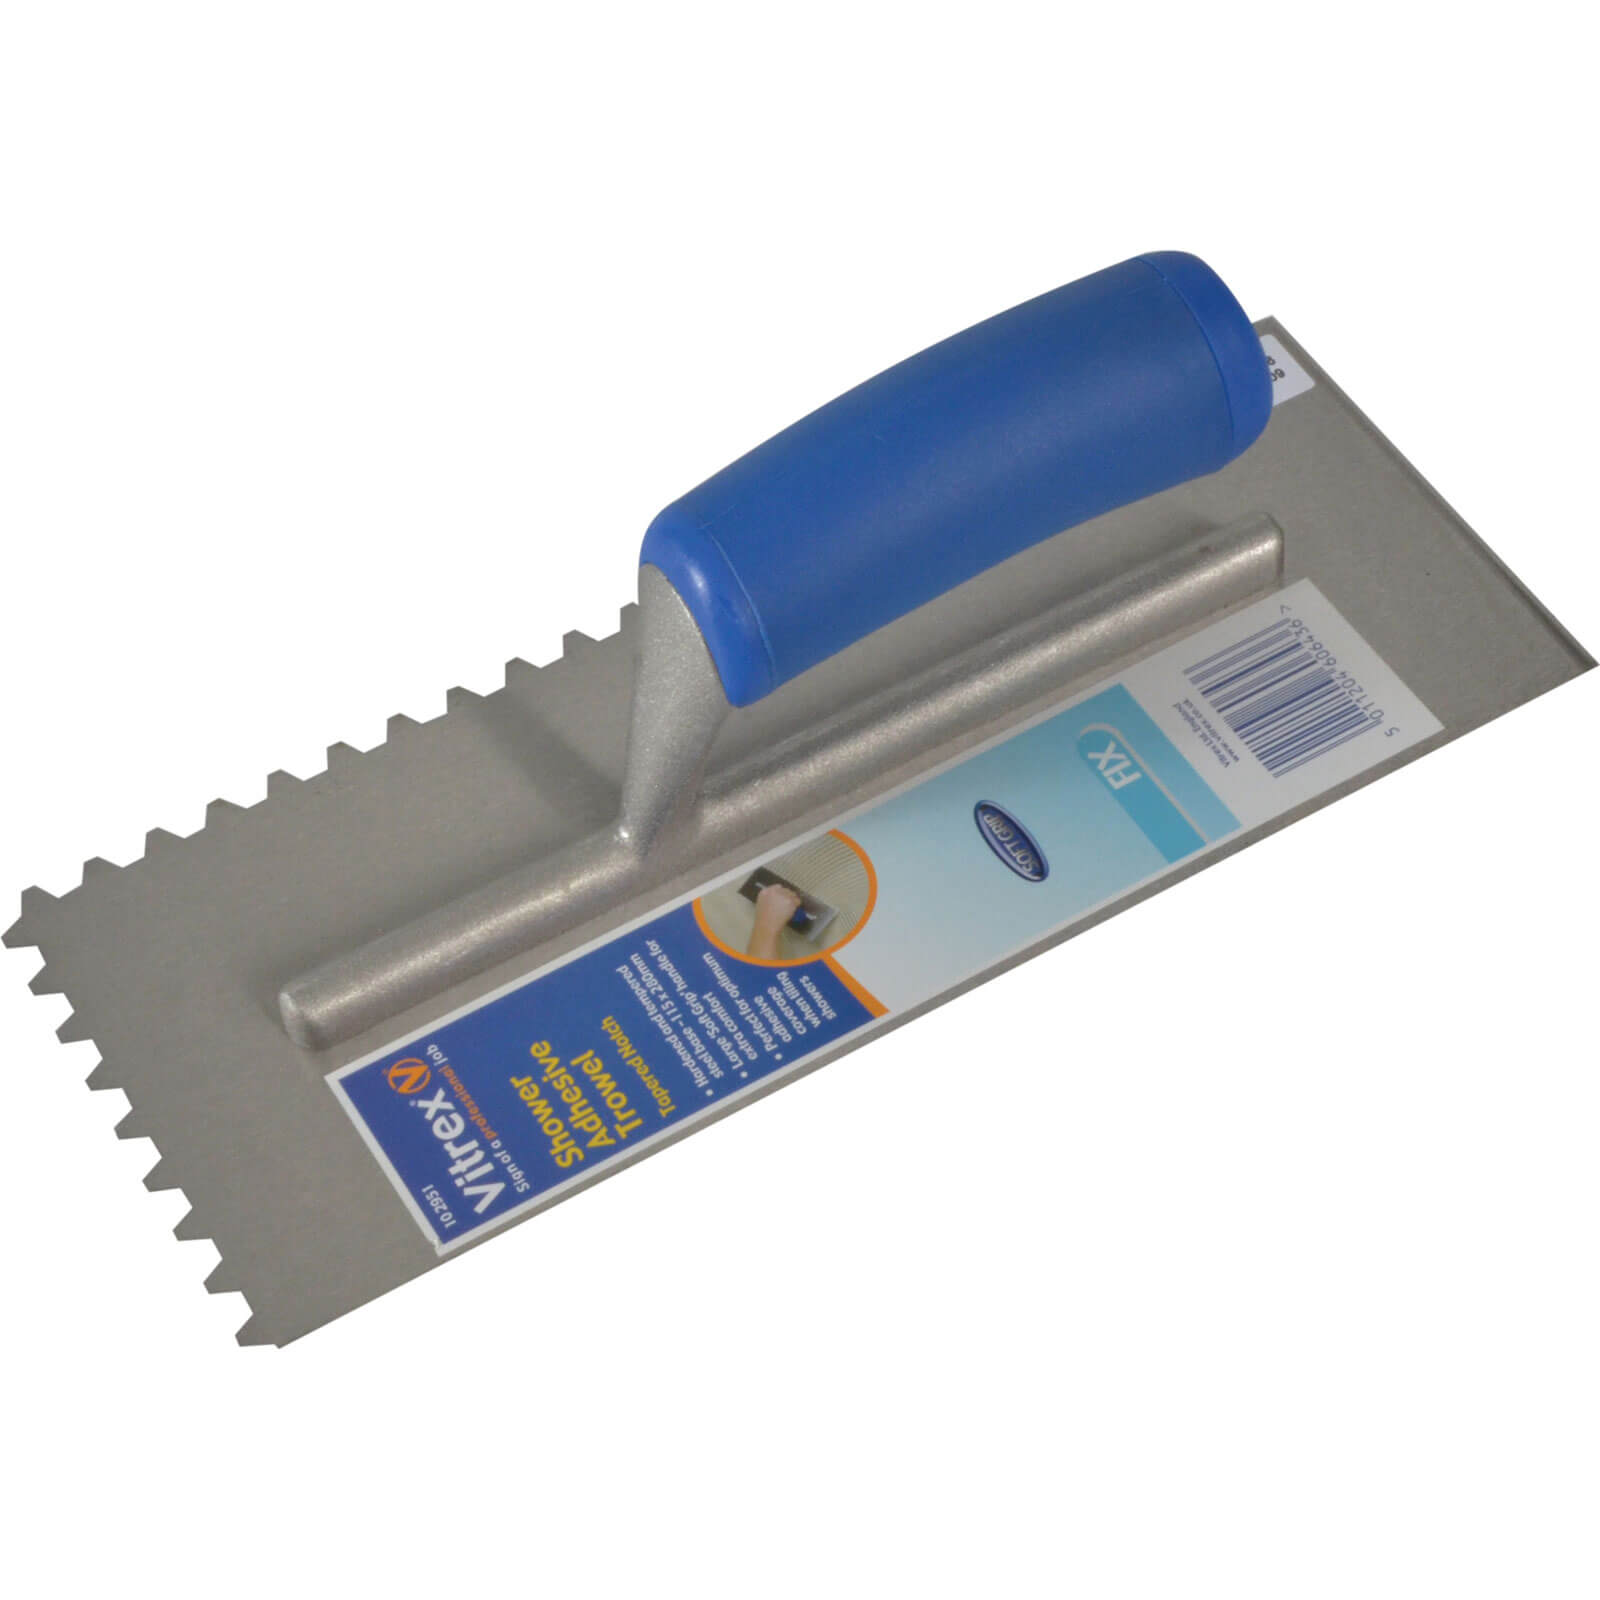 Vitrex Tapered Notch Shower Adhesive Trowel